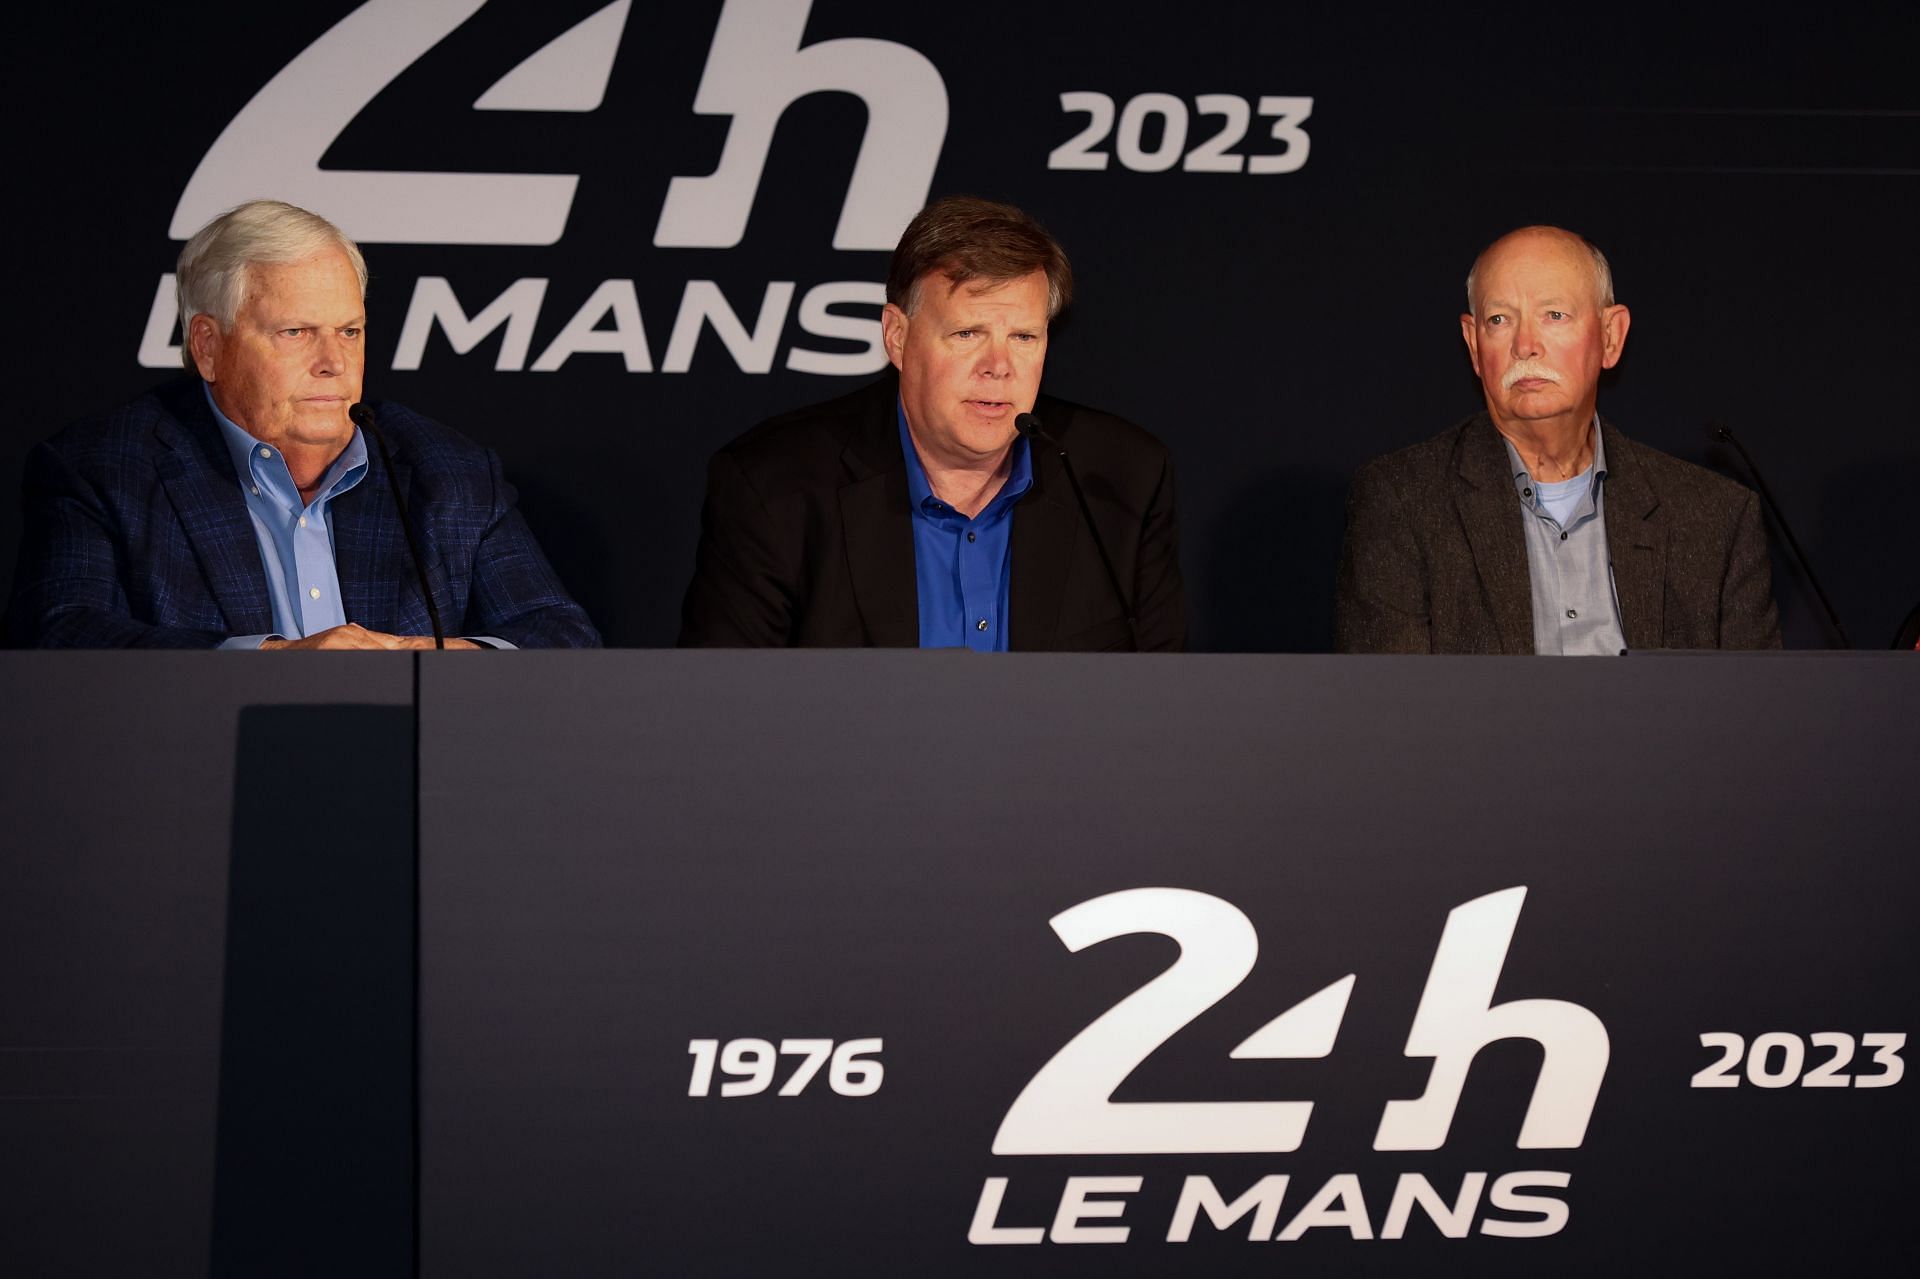 NASCAR and Hendrick Motorsports during the 24 Hours of Le Mans announcement